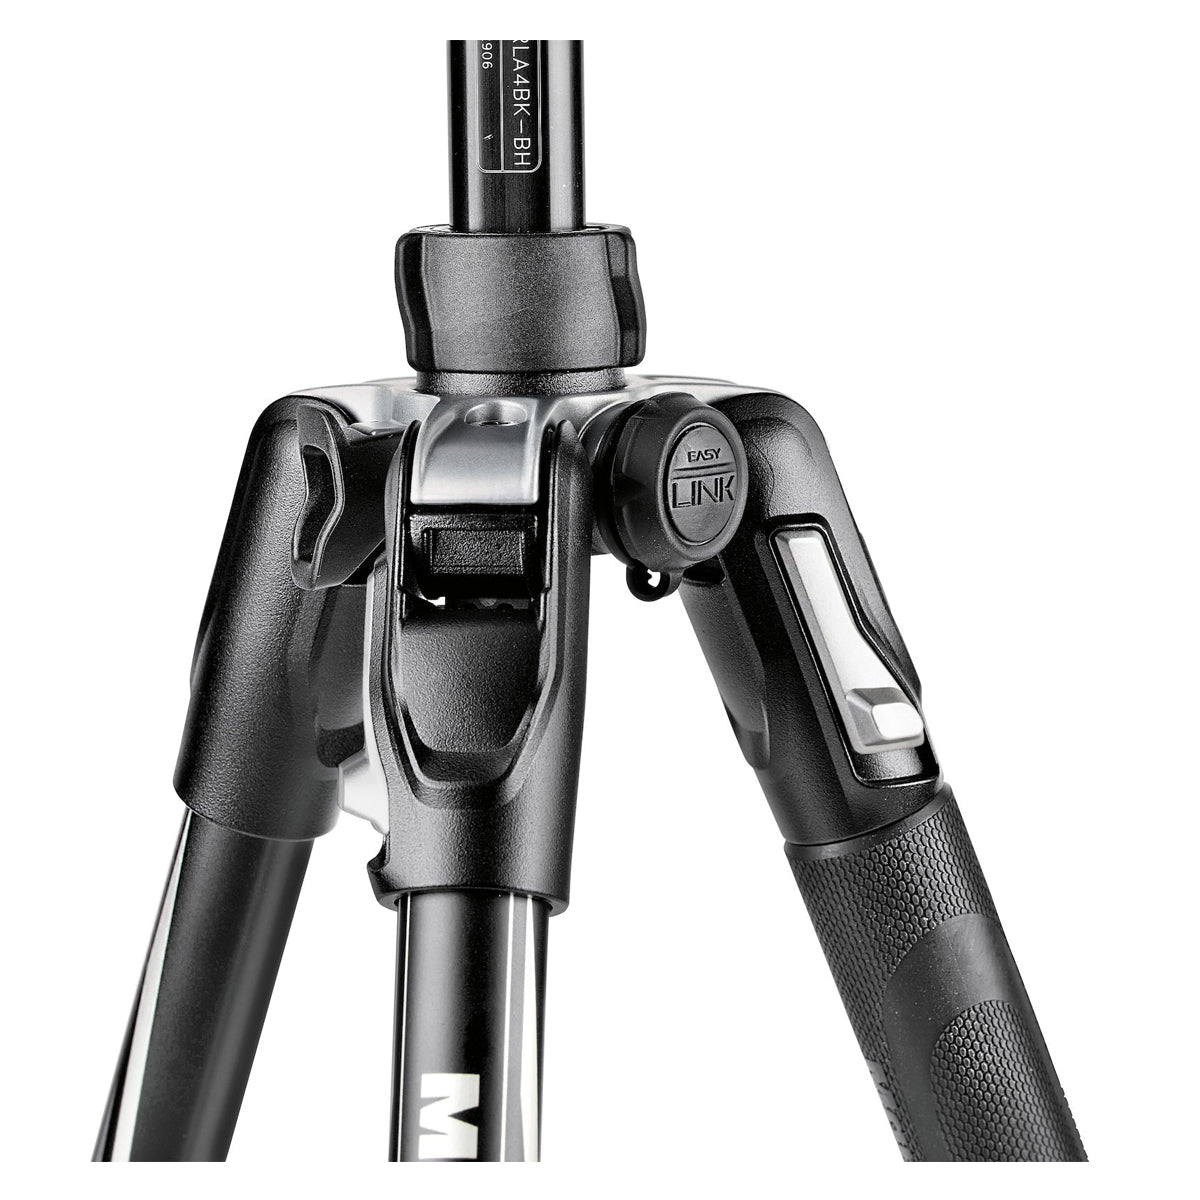 Manfrotto Befree Advanced Aluminum Tripod with Ball Head in Manfrotto Befree Advanced Aluminum Tripod with Ball Head by Manfrotto | Optics - goHUNT Shop by GOHUNT | Manfrotto - GOHUNT Shop